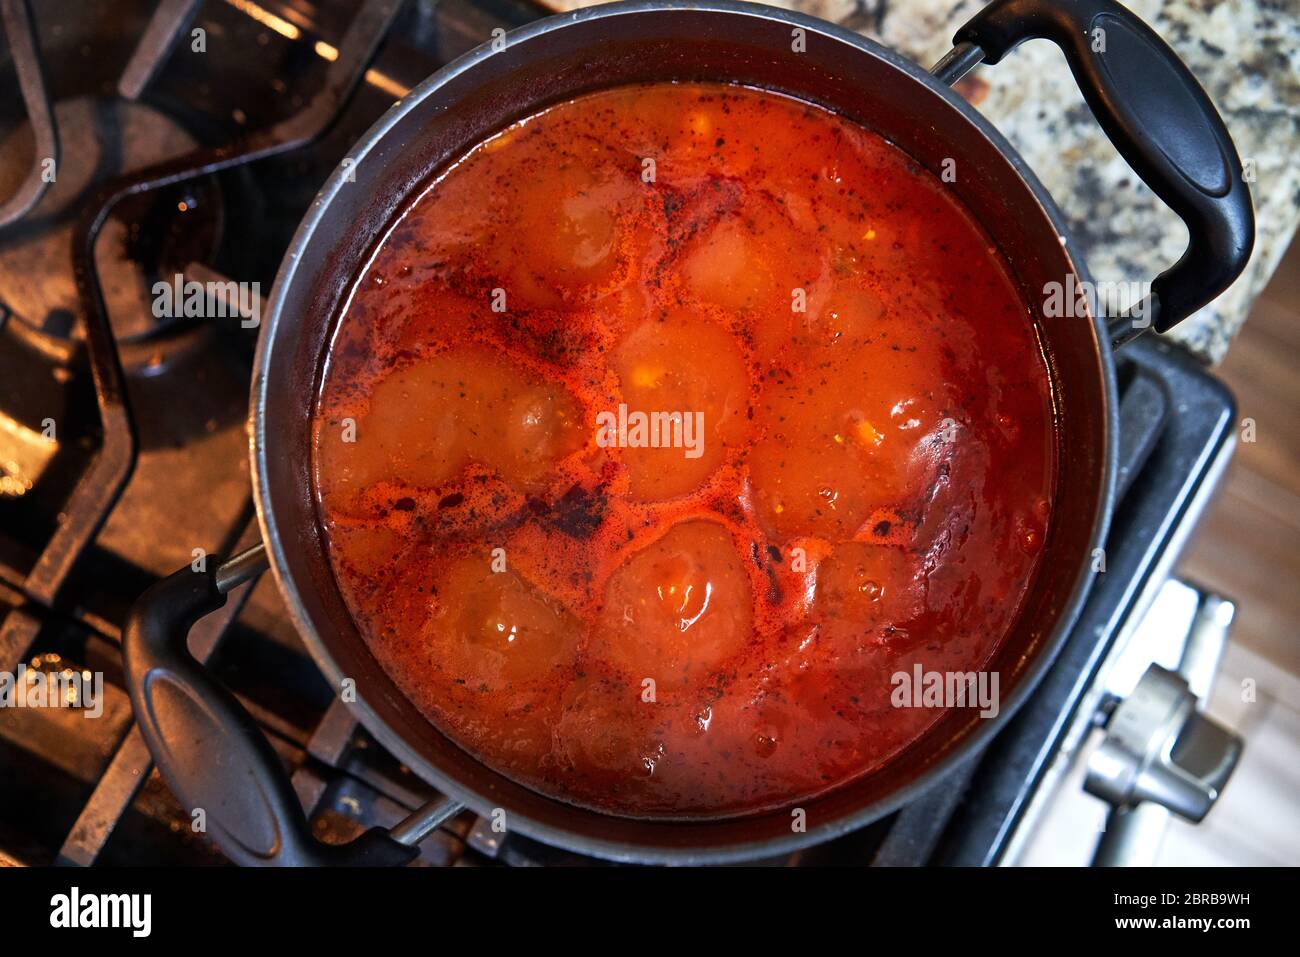 Overhead view of red tomato soup in a pot cooking on the stove in a kitchen. Stock Photo